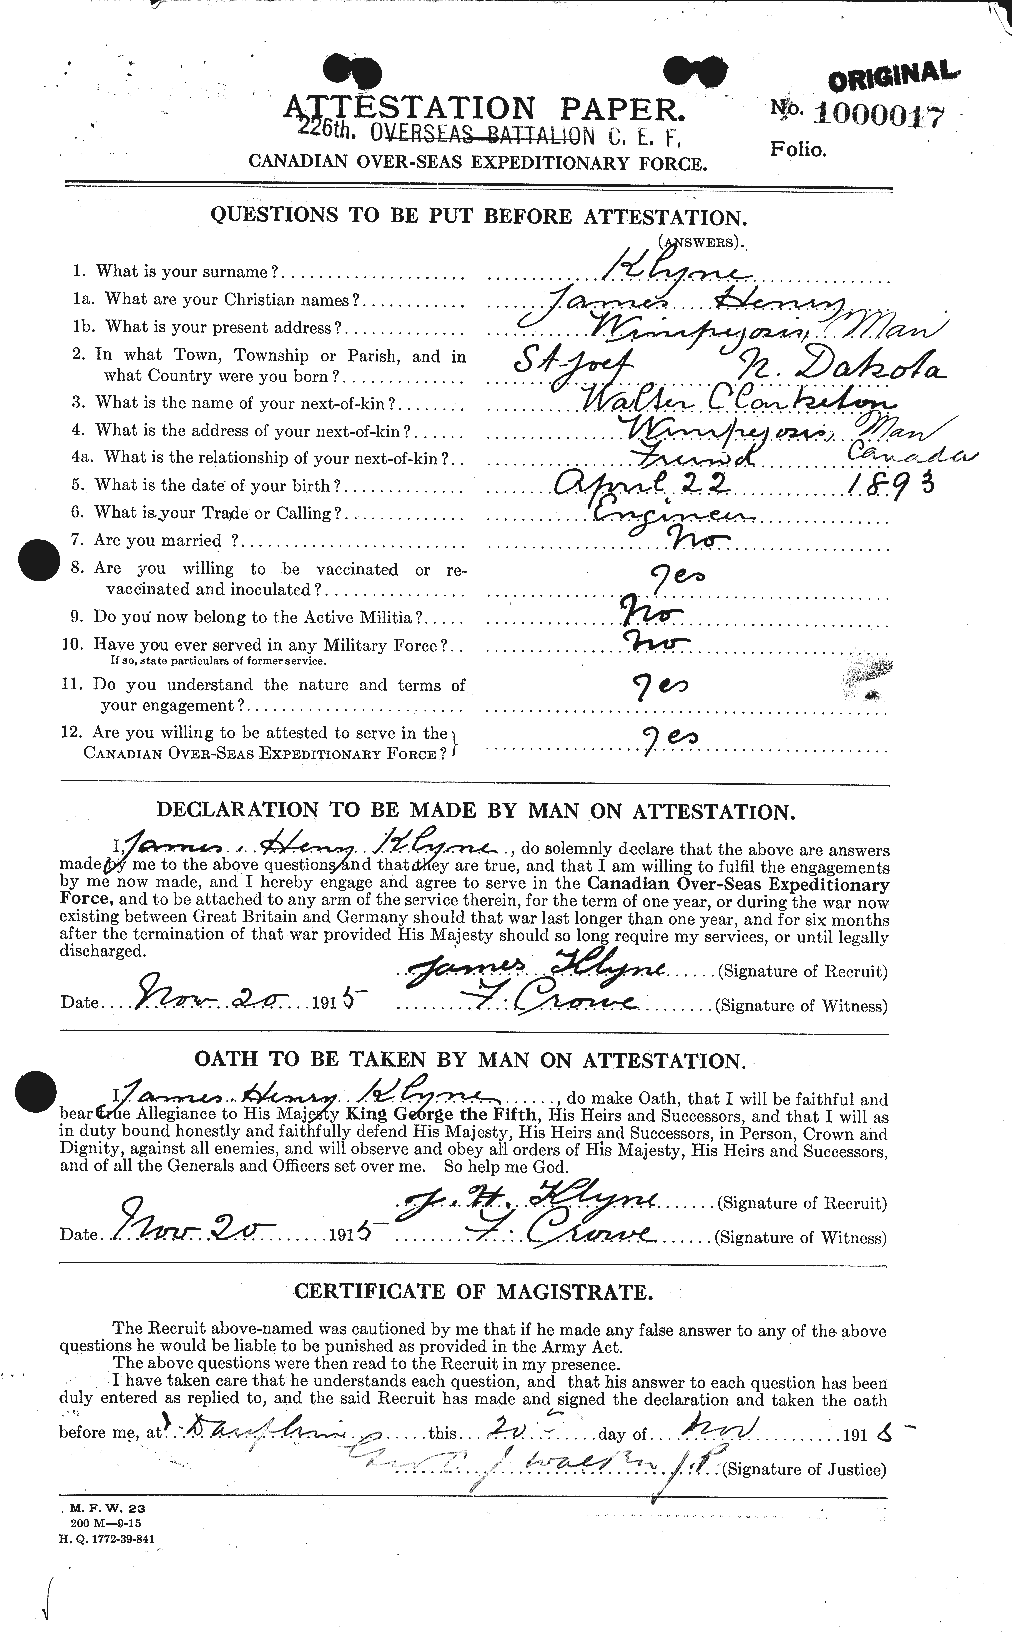 Personnel Records of the First World War - CEF 440568a